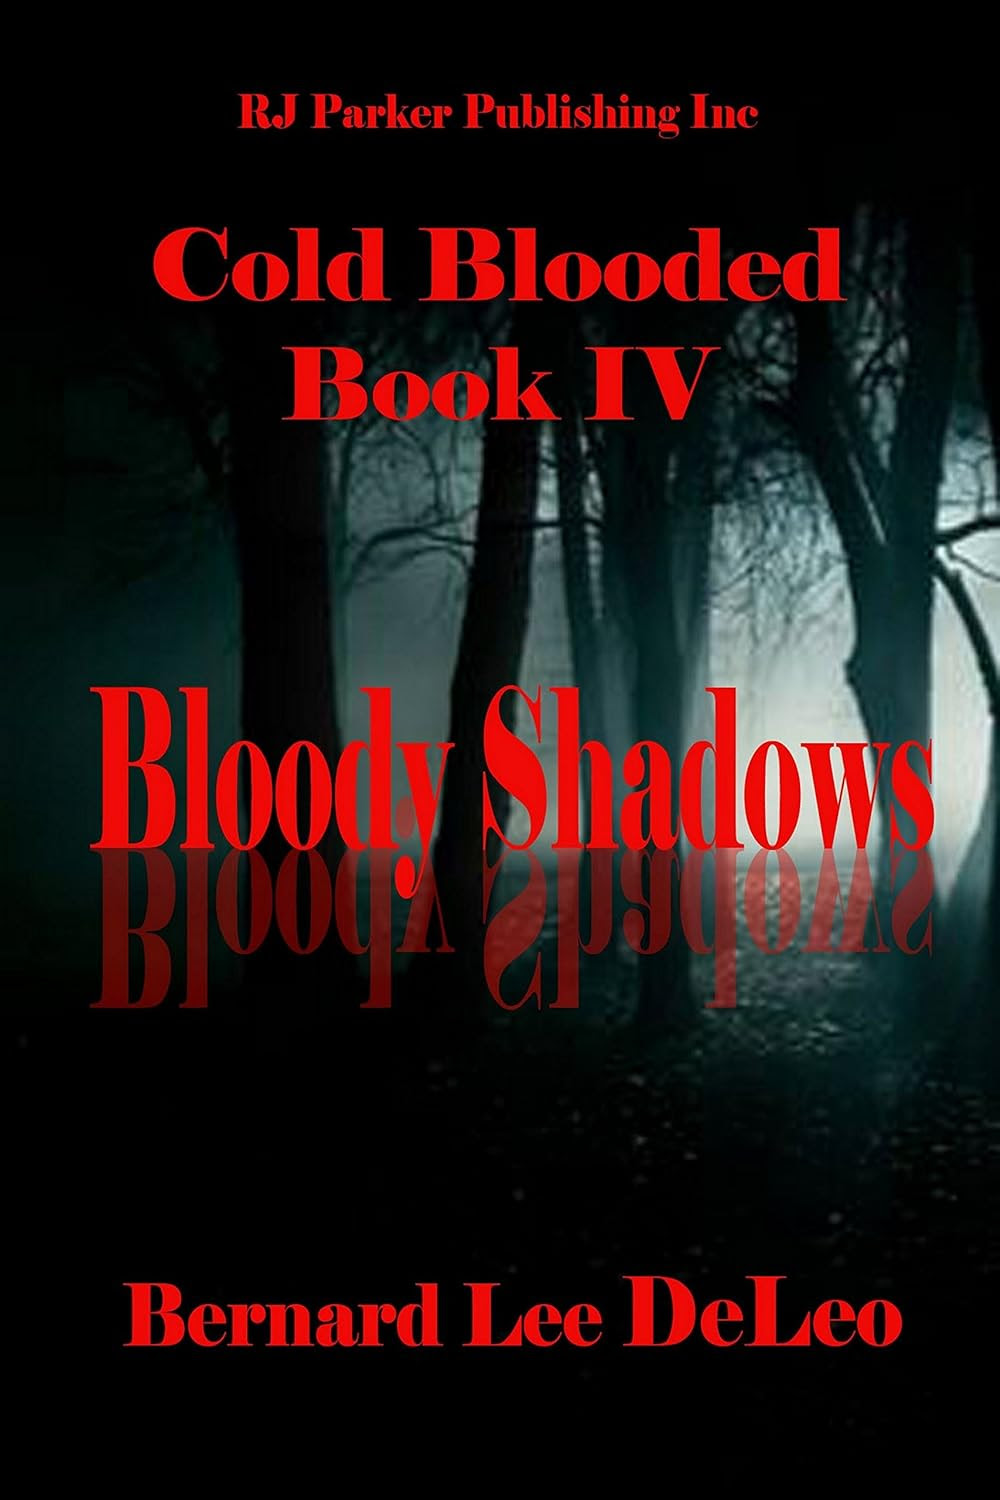 Cold Blooded IV: Bloody Shadows by Bernard Lee DeLeo